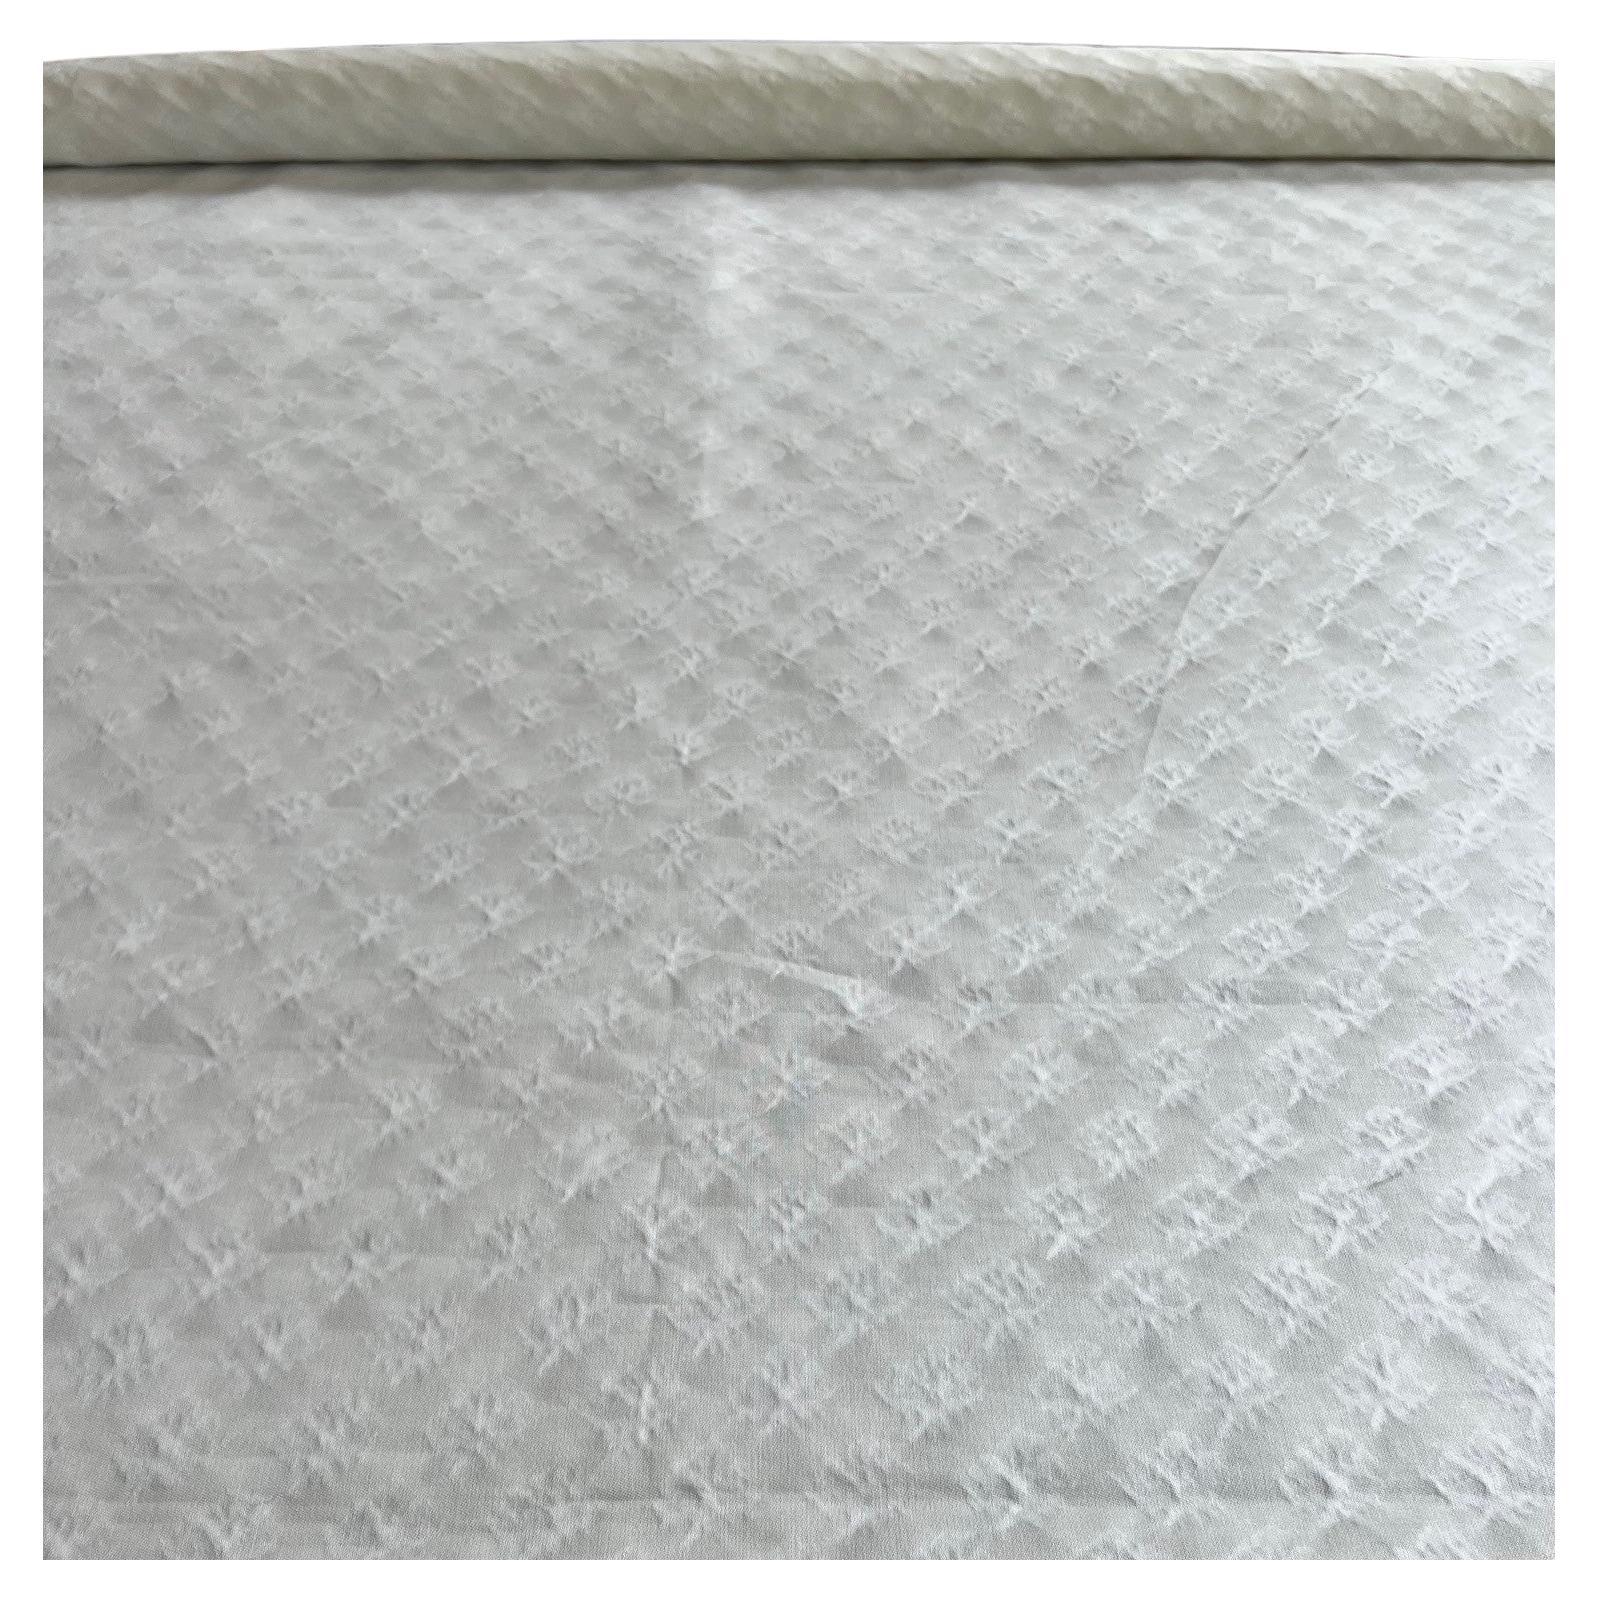 Venetian Fortuny Persiano Fabric in White on White, 2 Yards